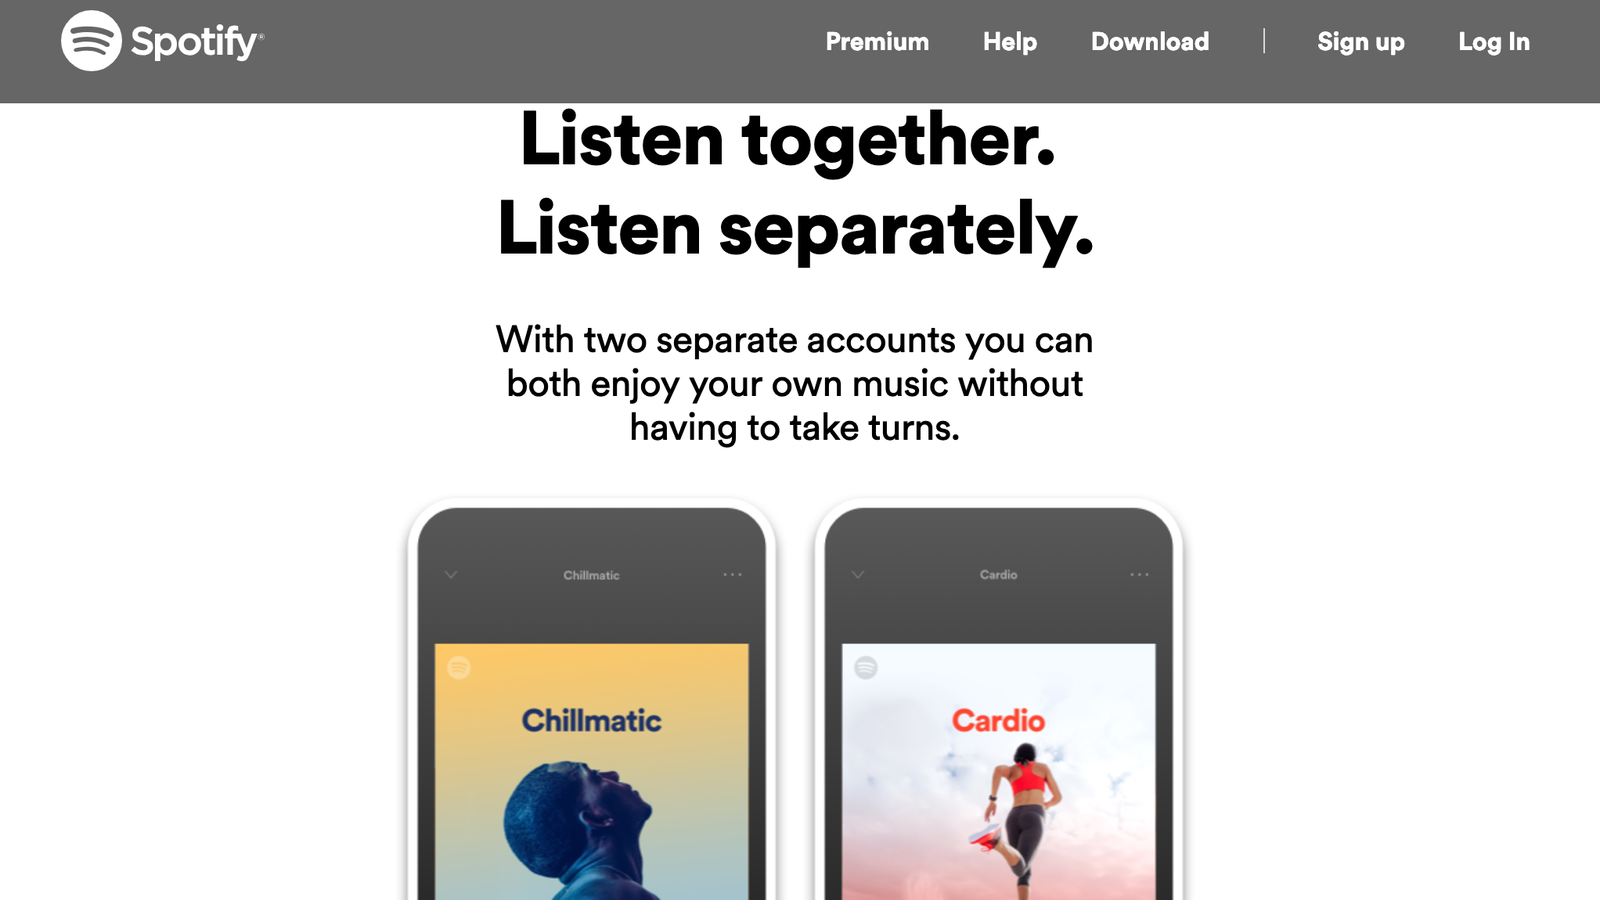 what spotify plans are there